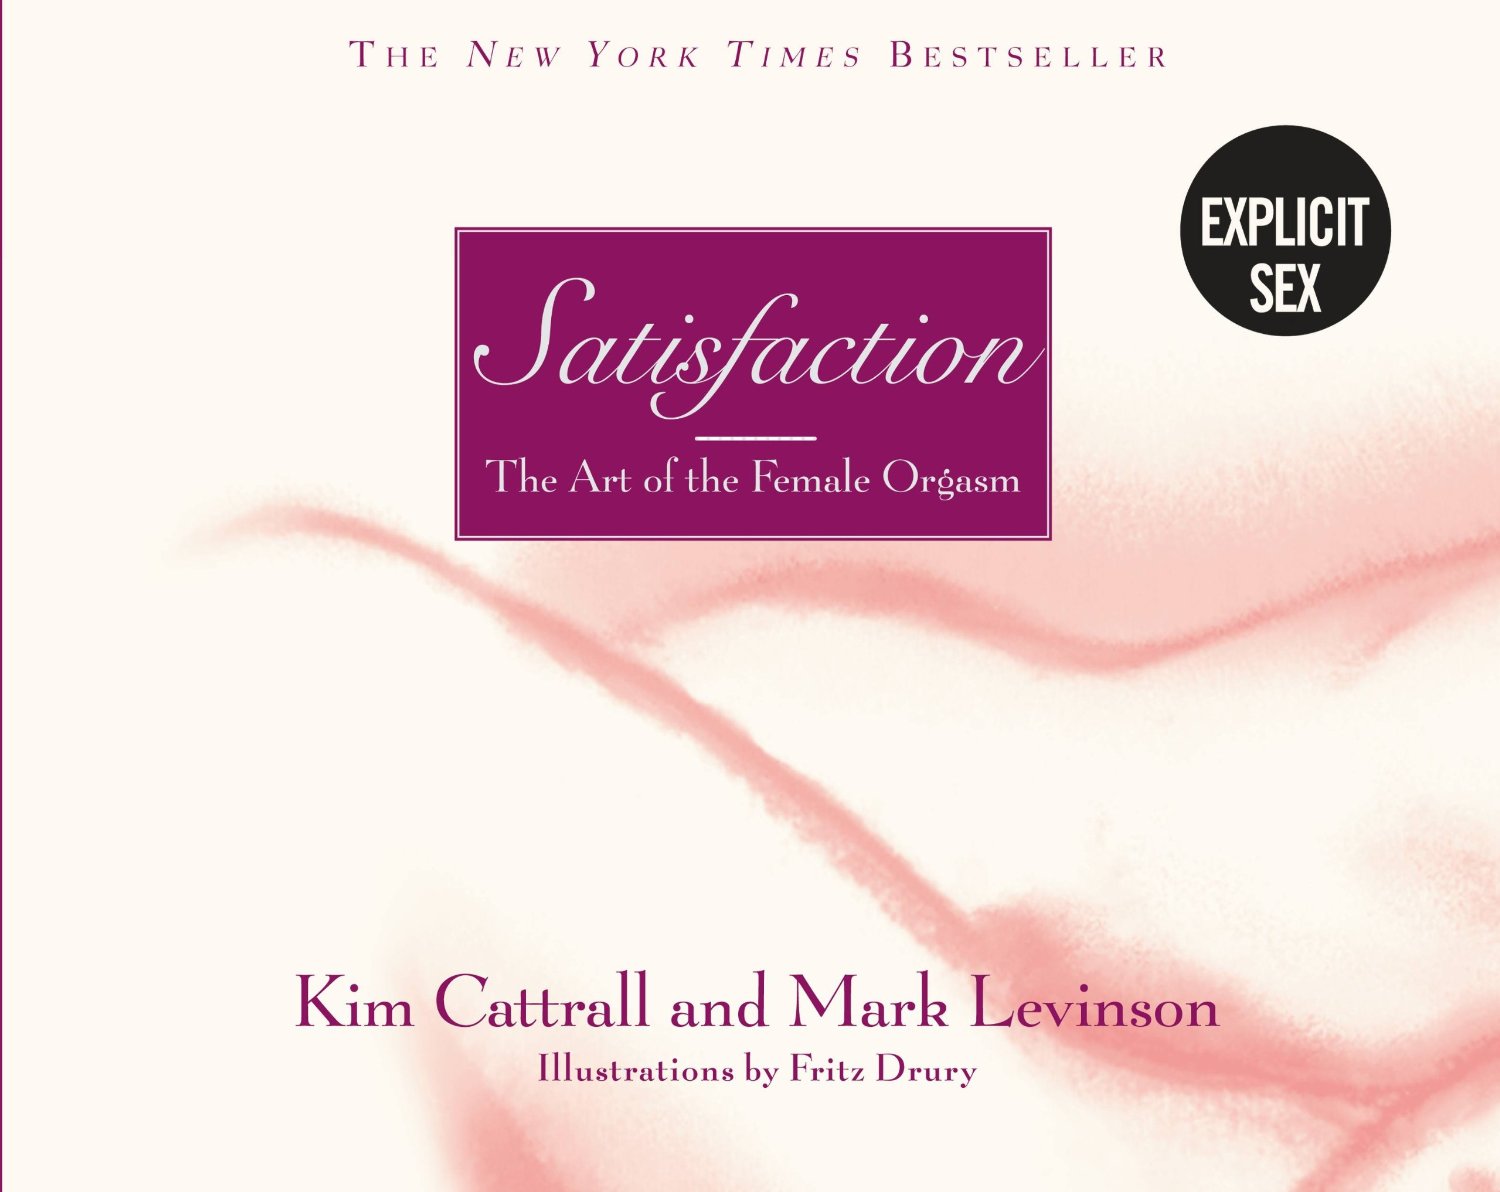 Review: "Satisfaction: The Art of the Female Orgasm", by Kim Cattrall and Mark Levinson 3